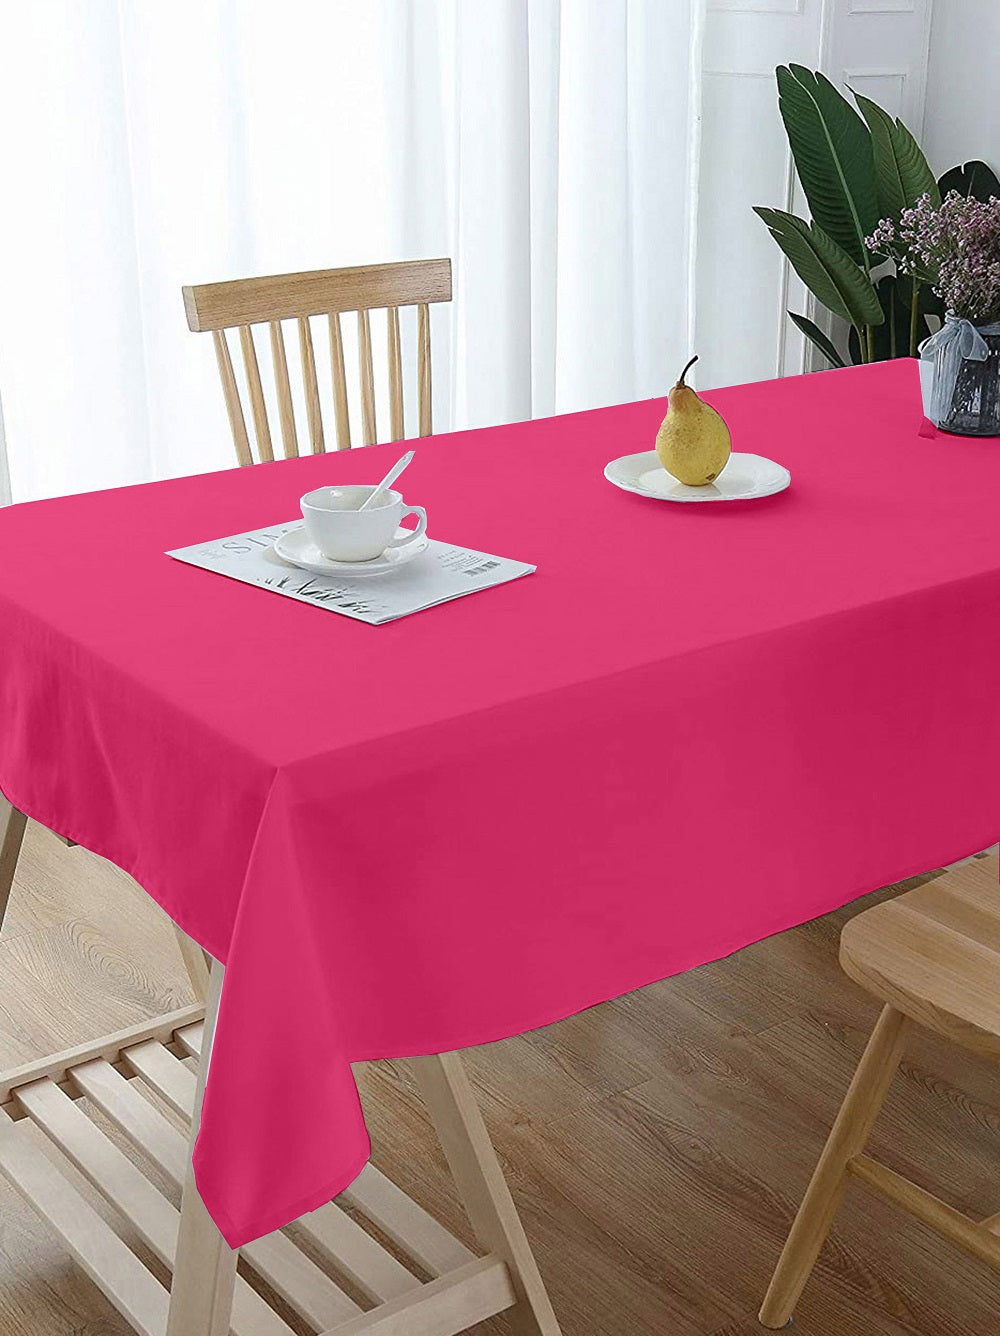 Lushomes dining table cover 6 seater, Pink Classic Plain Dining Table Cover Cloth, table cloth for 6 seater dining table, table cover 6 seater  (Size 60 x 70”, 6 Seater Table Cloth)